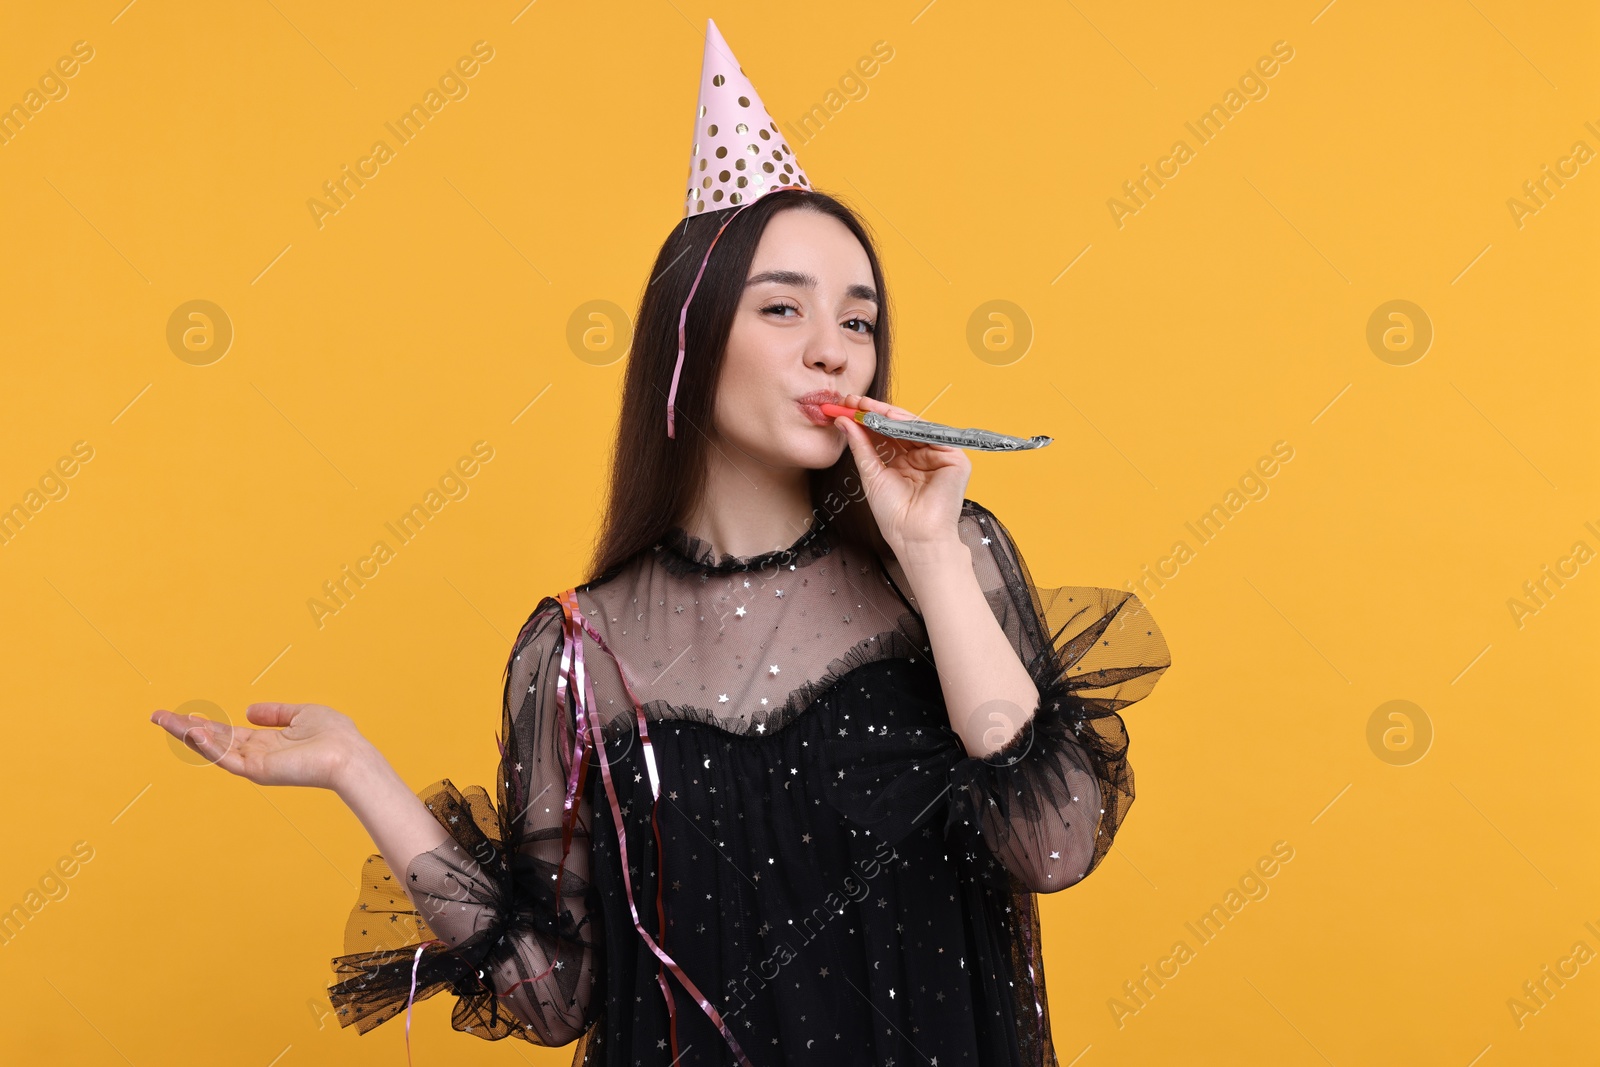 Photo of Woman in party hat with blower and streamers on orange background